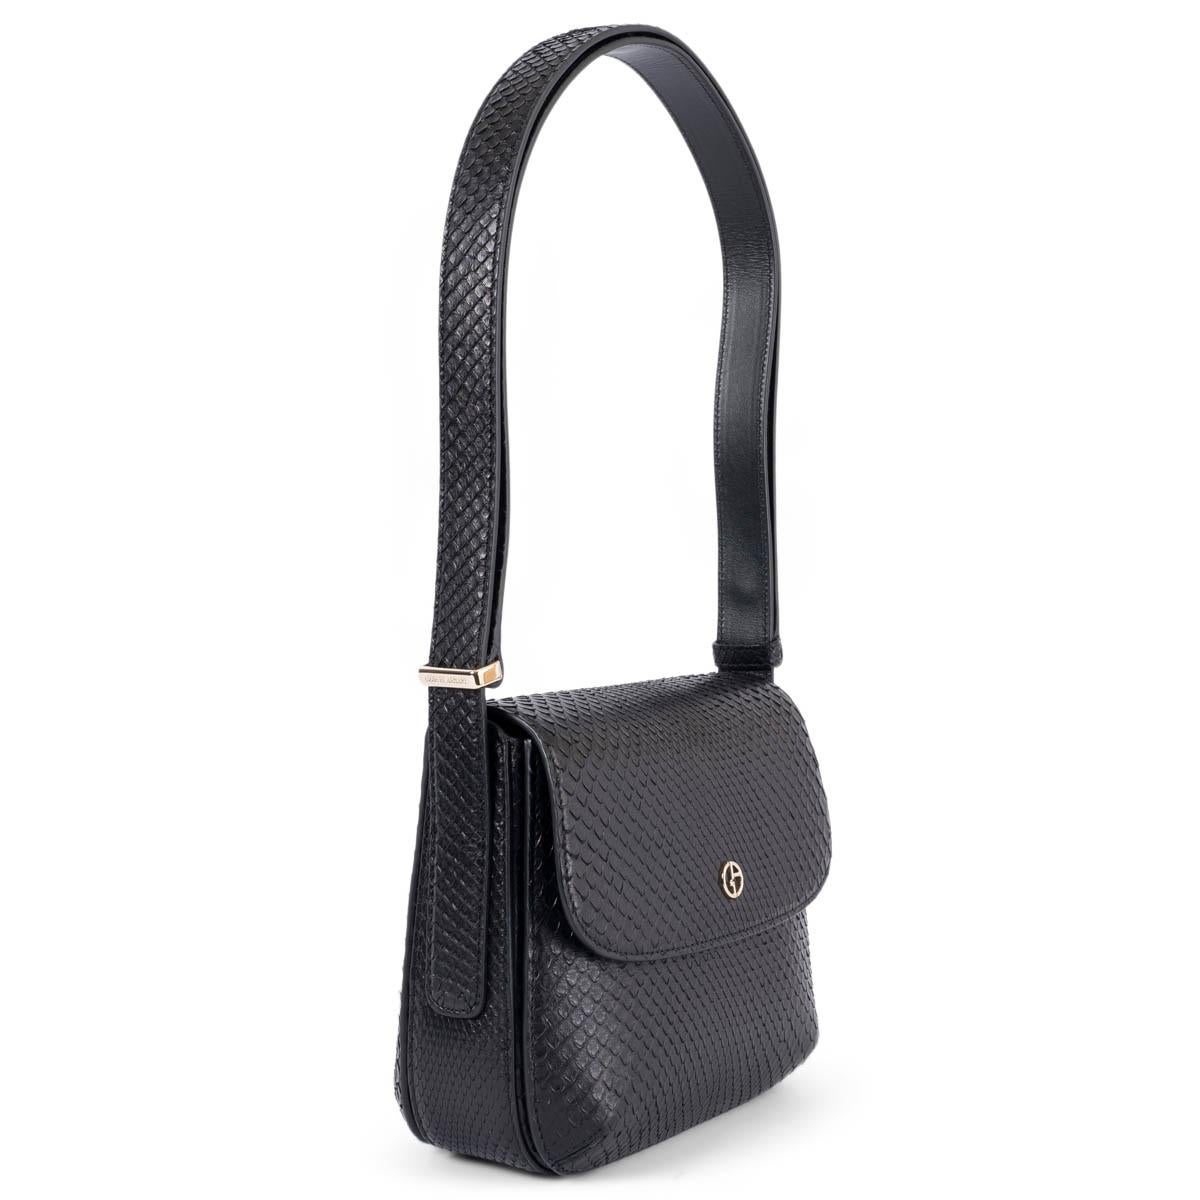 100% authentic Giorgio Armani La Prima small shoulder bag in black snakeskin featuring light gold-tone hardware. Opens with a concealed magnetic button under the flap and is lined in nude suede with one open pocket under the flap, one credit card